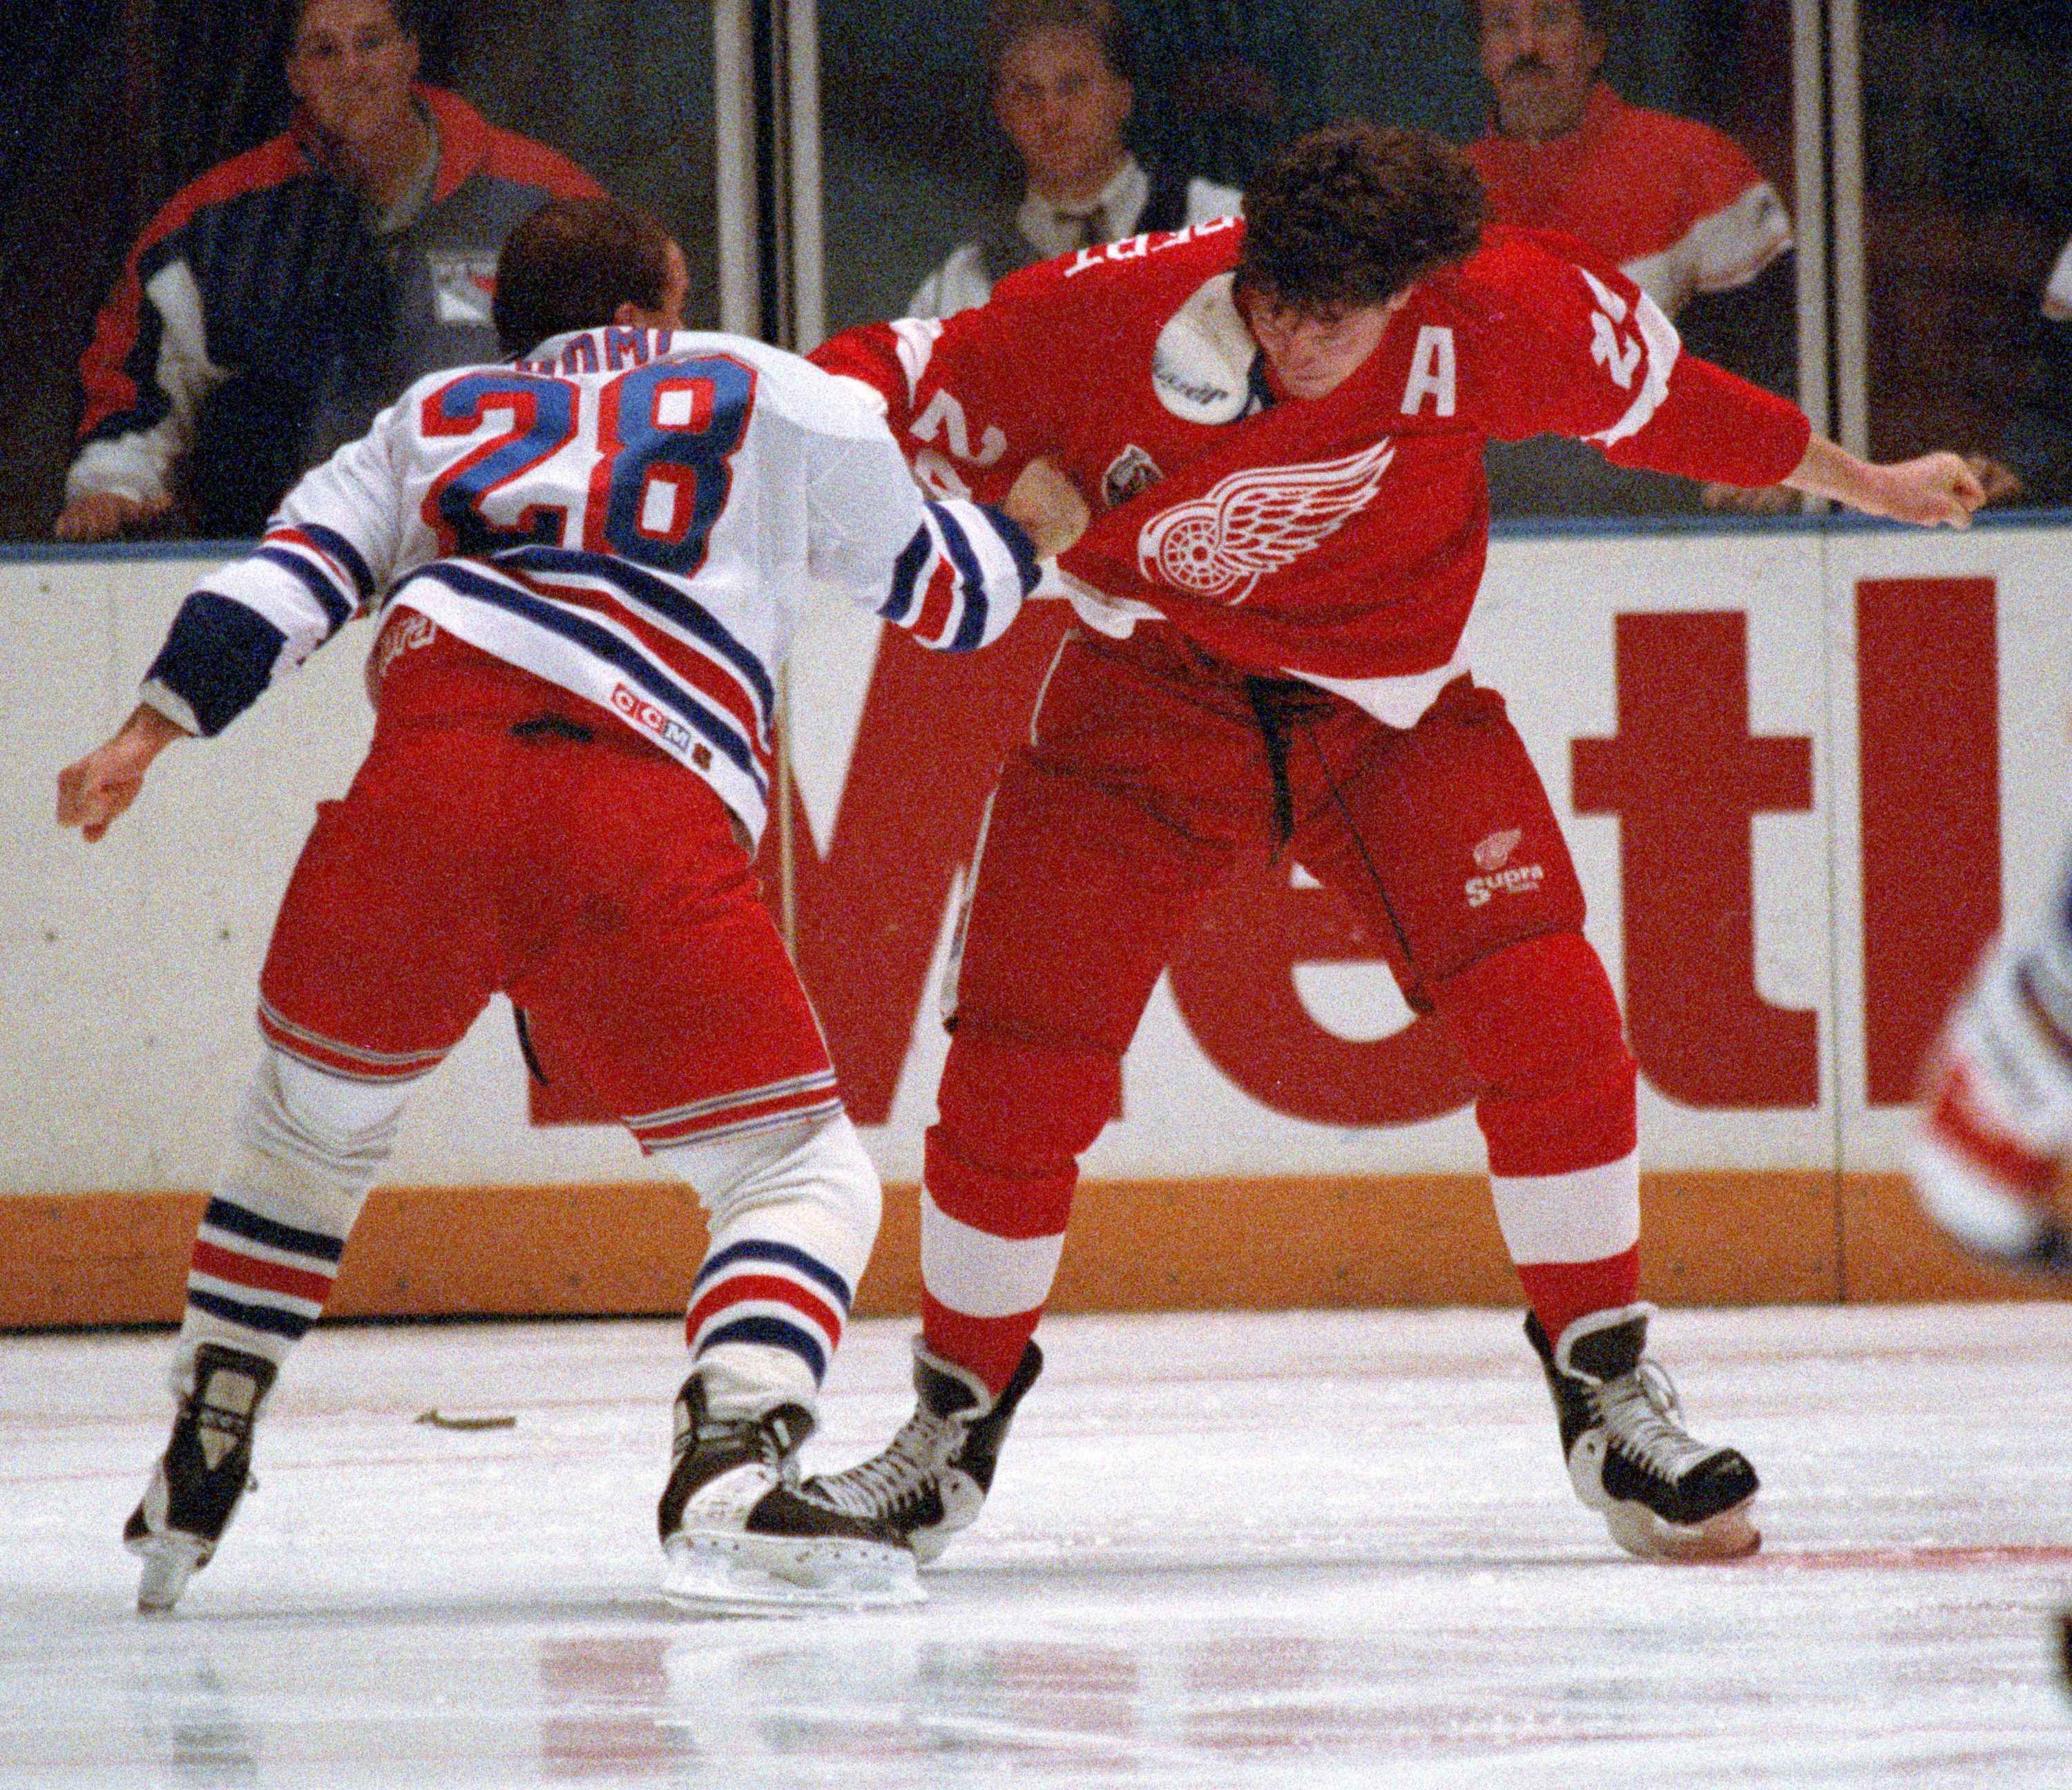 Ashes of late NHL enforcer Bob Probert spread in penalty box.